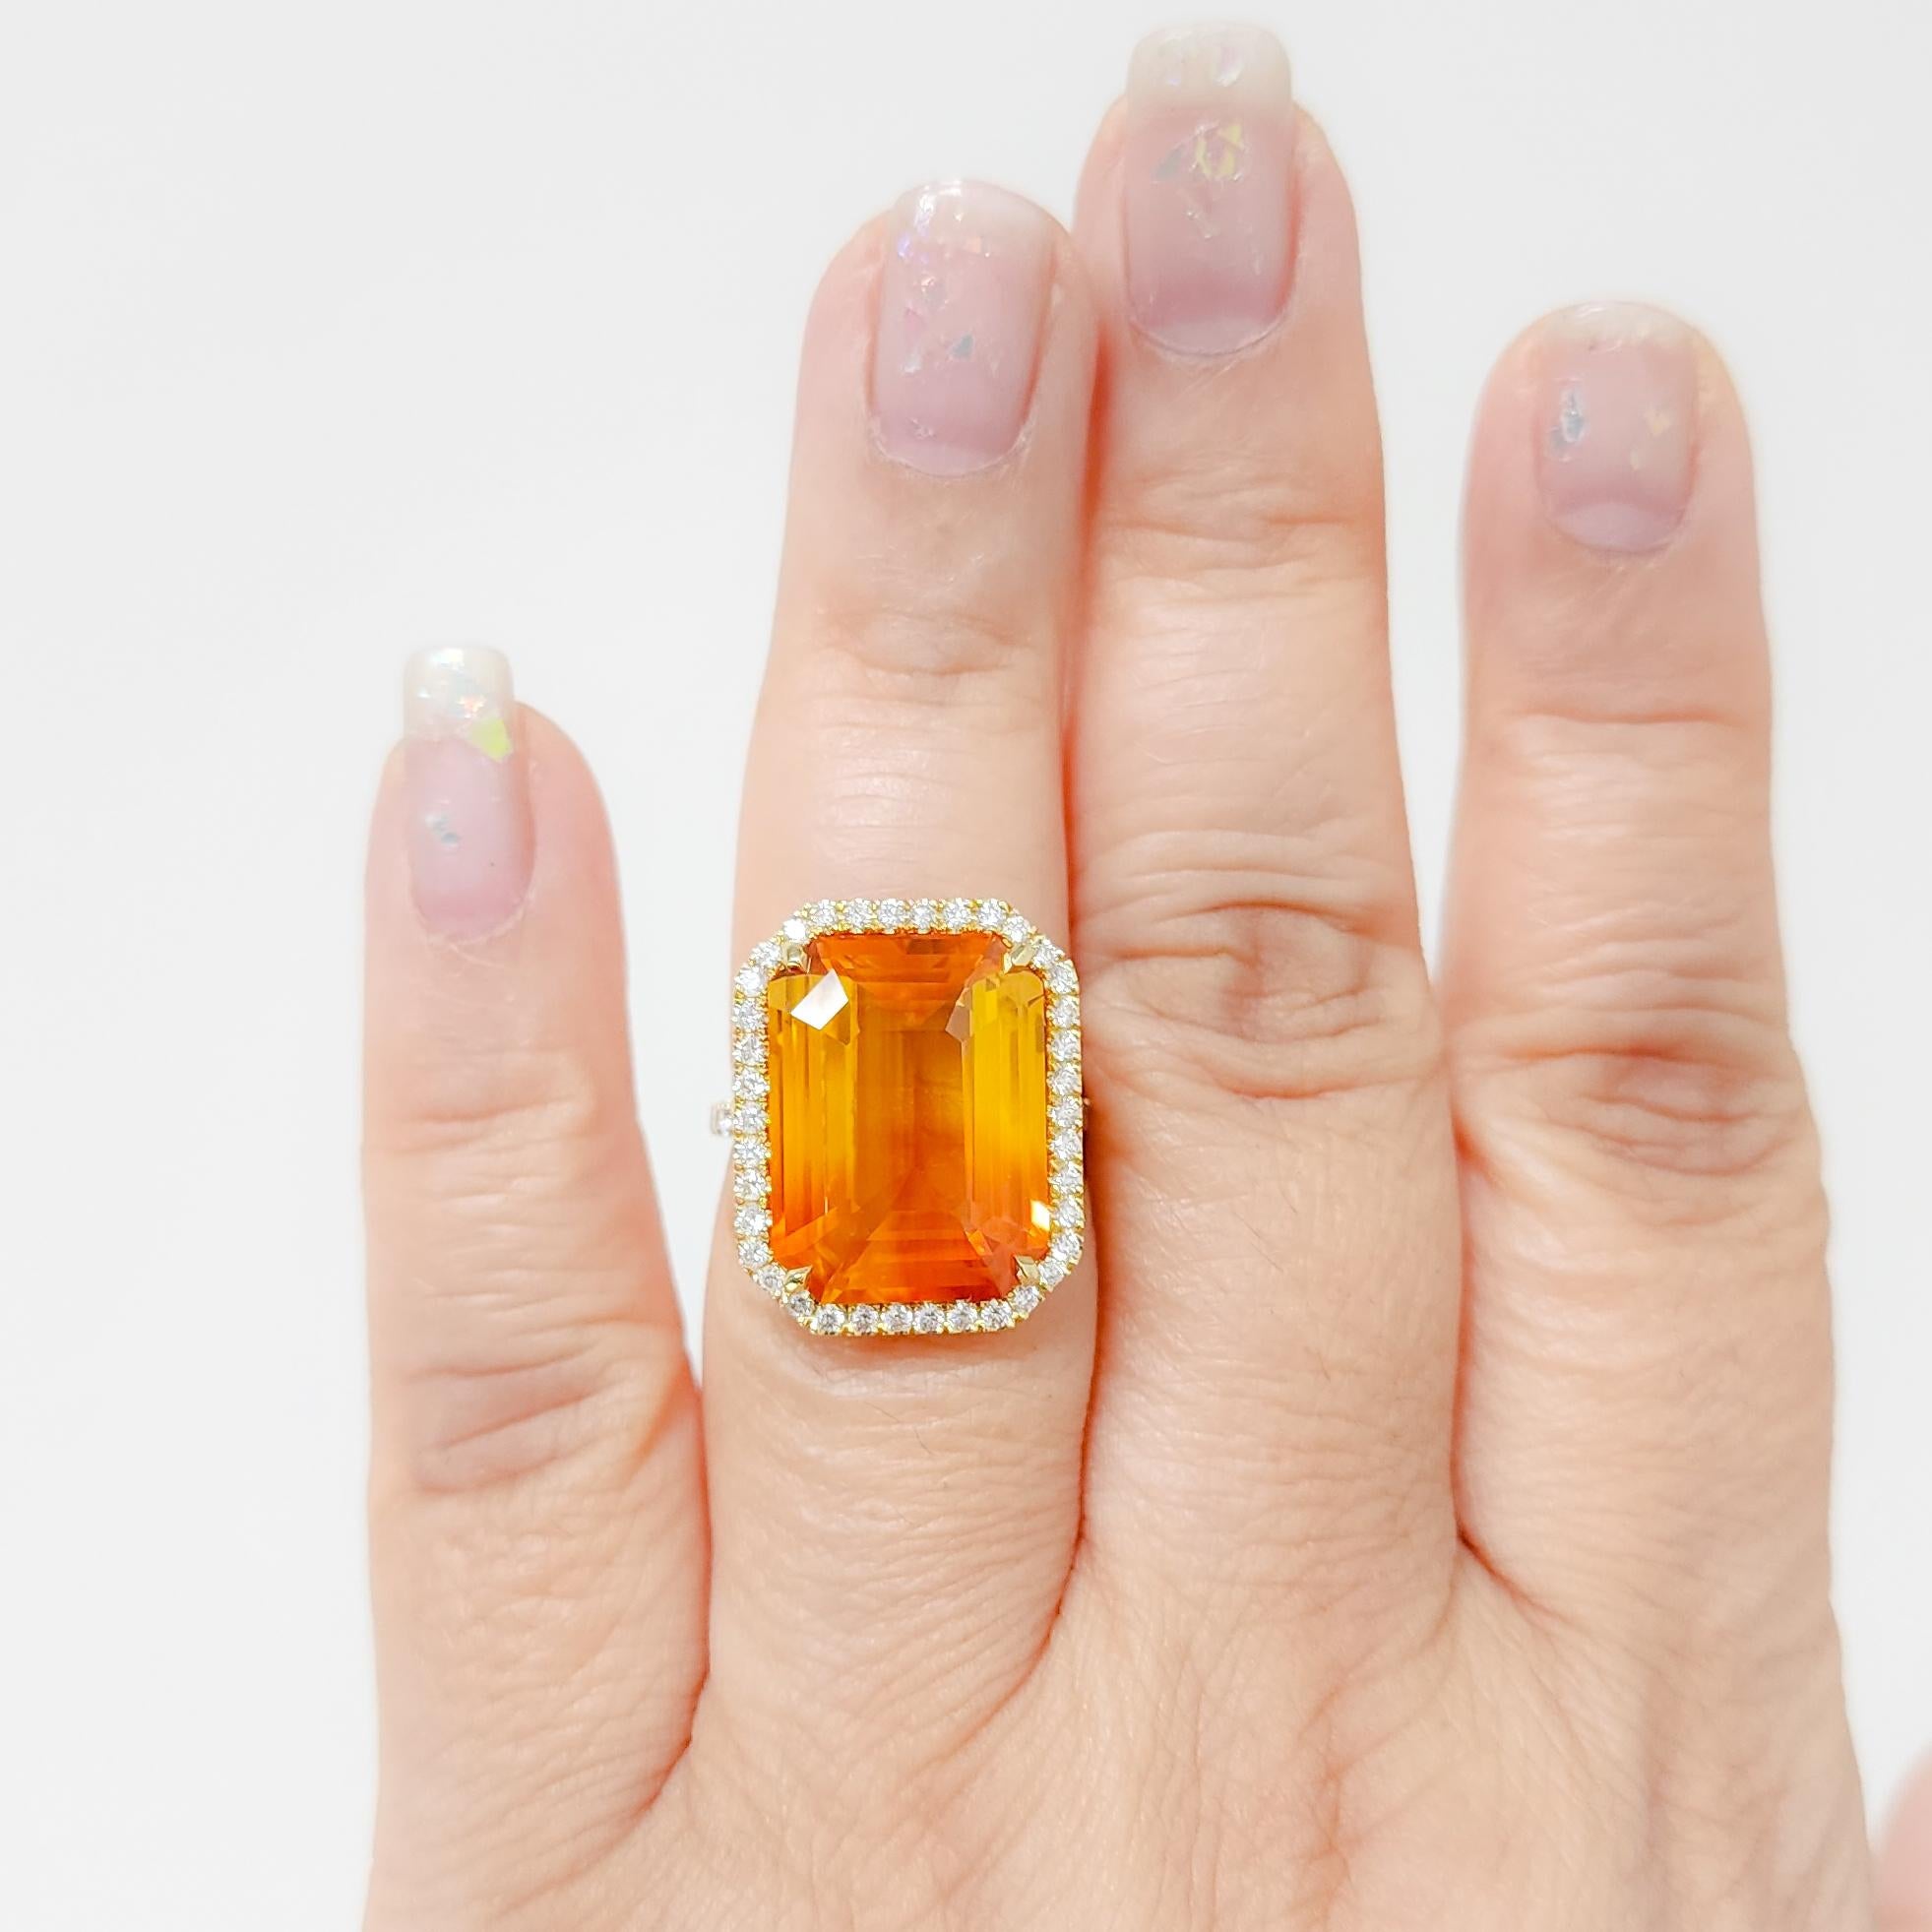 Gorgeous bright 18.05 ct. yellowish orange sapphire emerald cut with 0.79 ct. good quality white diamond rounds.  Handmade in 18k yellow gold.  Ring size 6.5.  GIA certificate included.